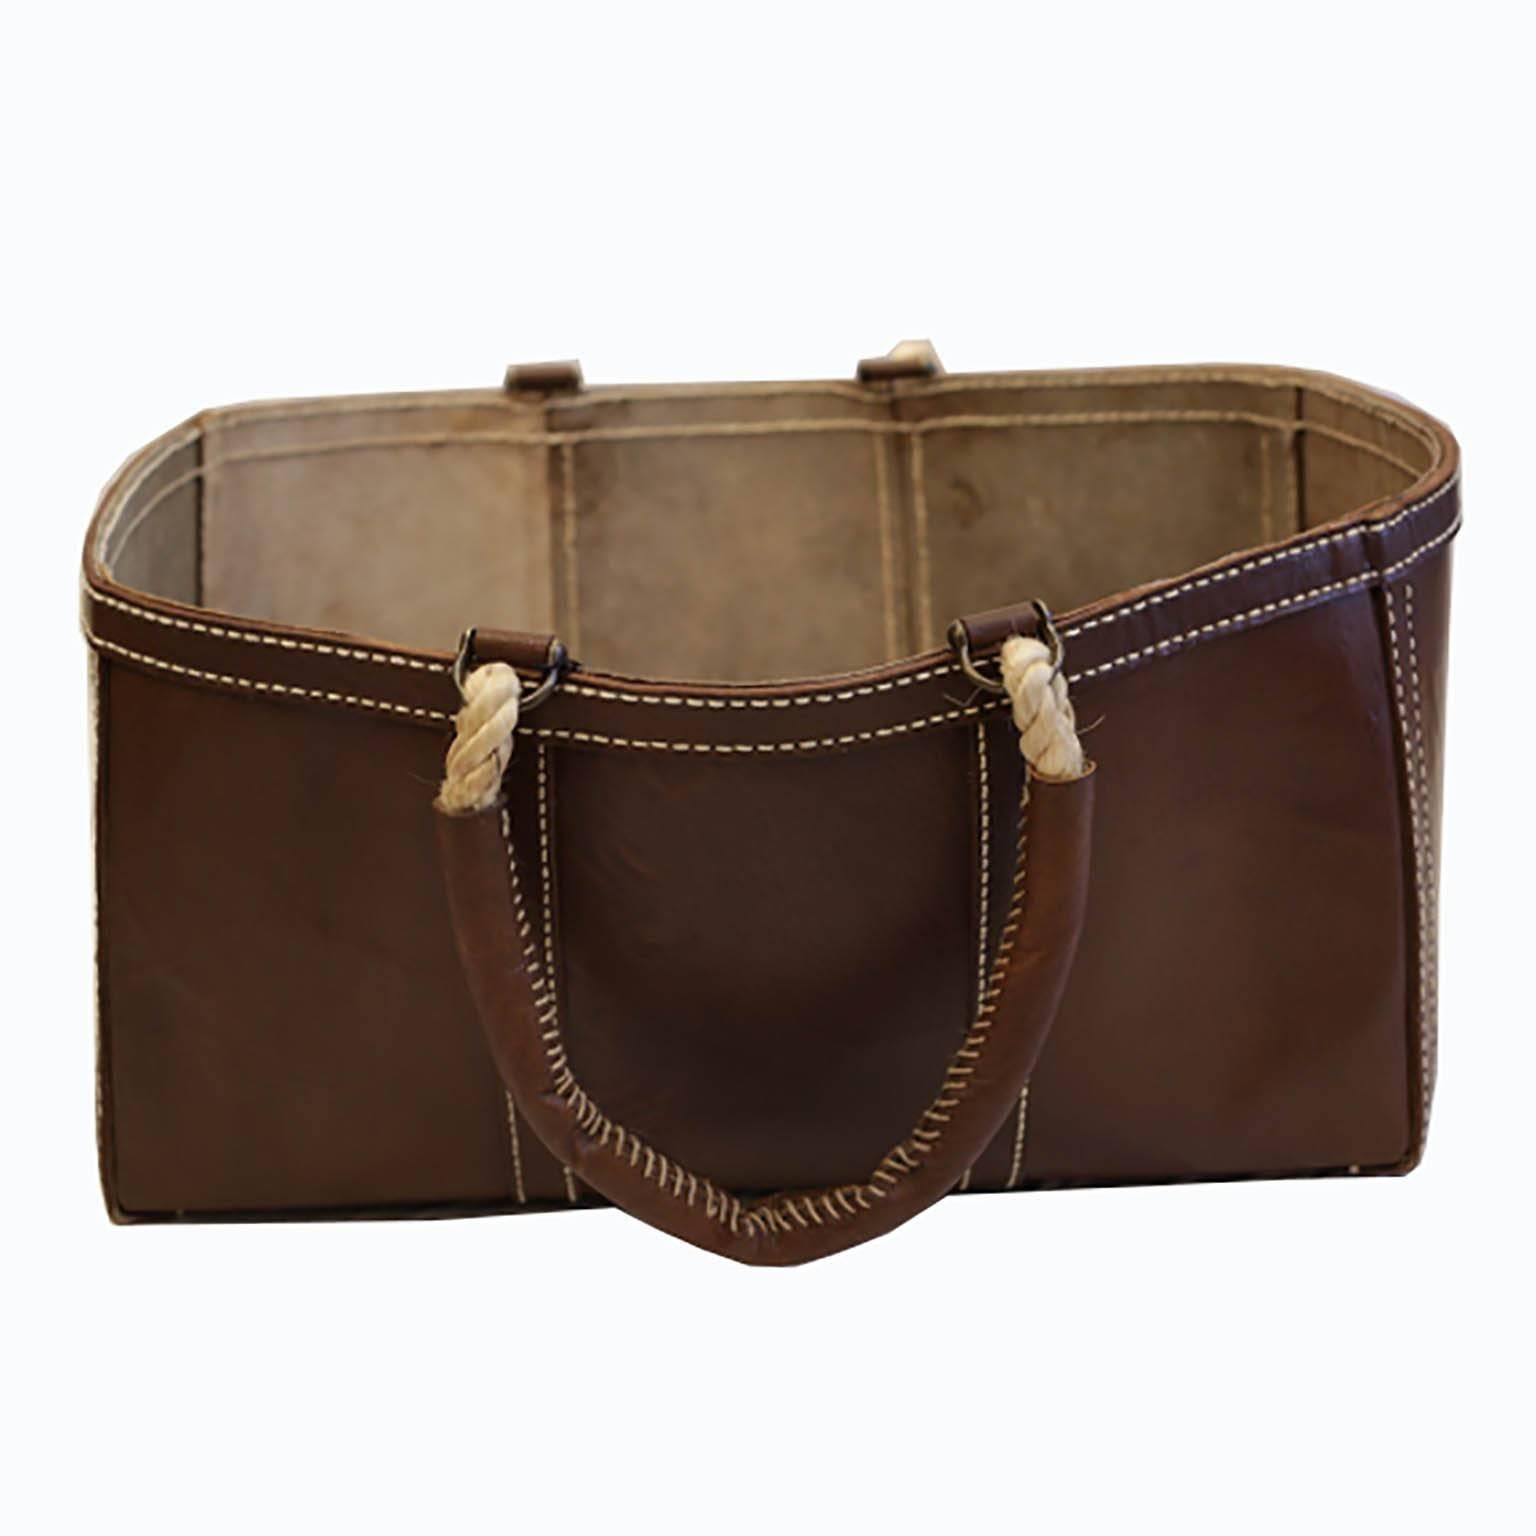 Sturdy buffalo leather in a brown finish with white hand stitching, natural rope handles, and bronze fittings.
Dimensions: 24.5'' x 16'' x 12''
Color: Brown.
 